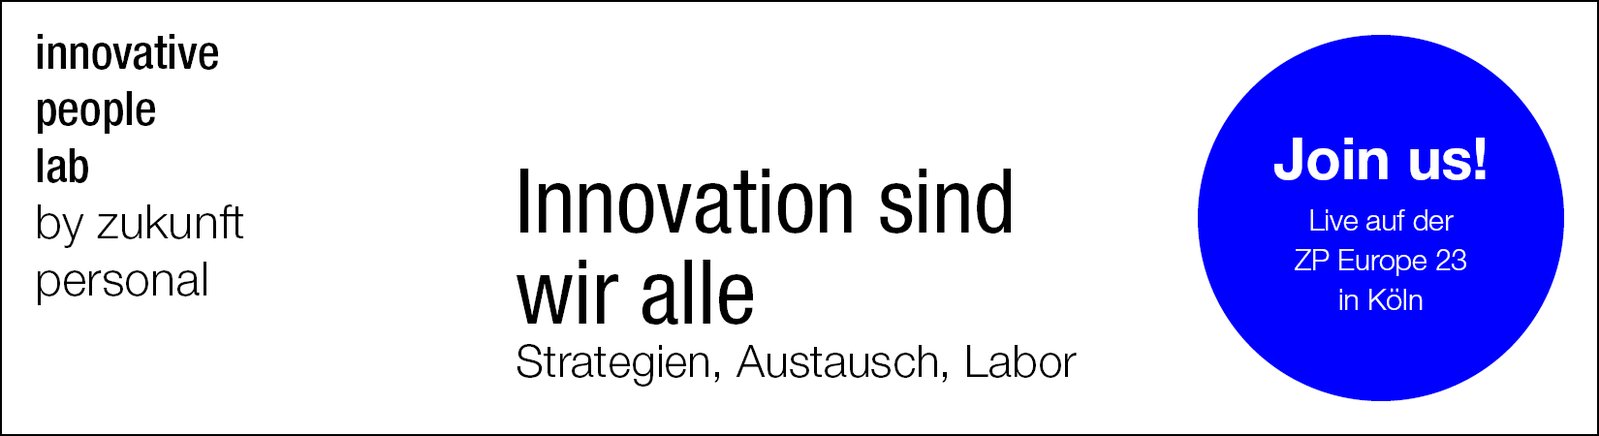 Das Innovative People Lab by Zukunft Personal